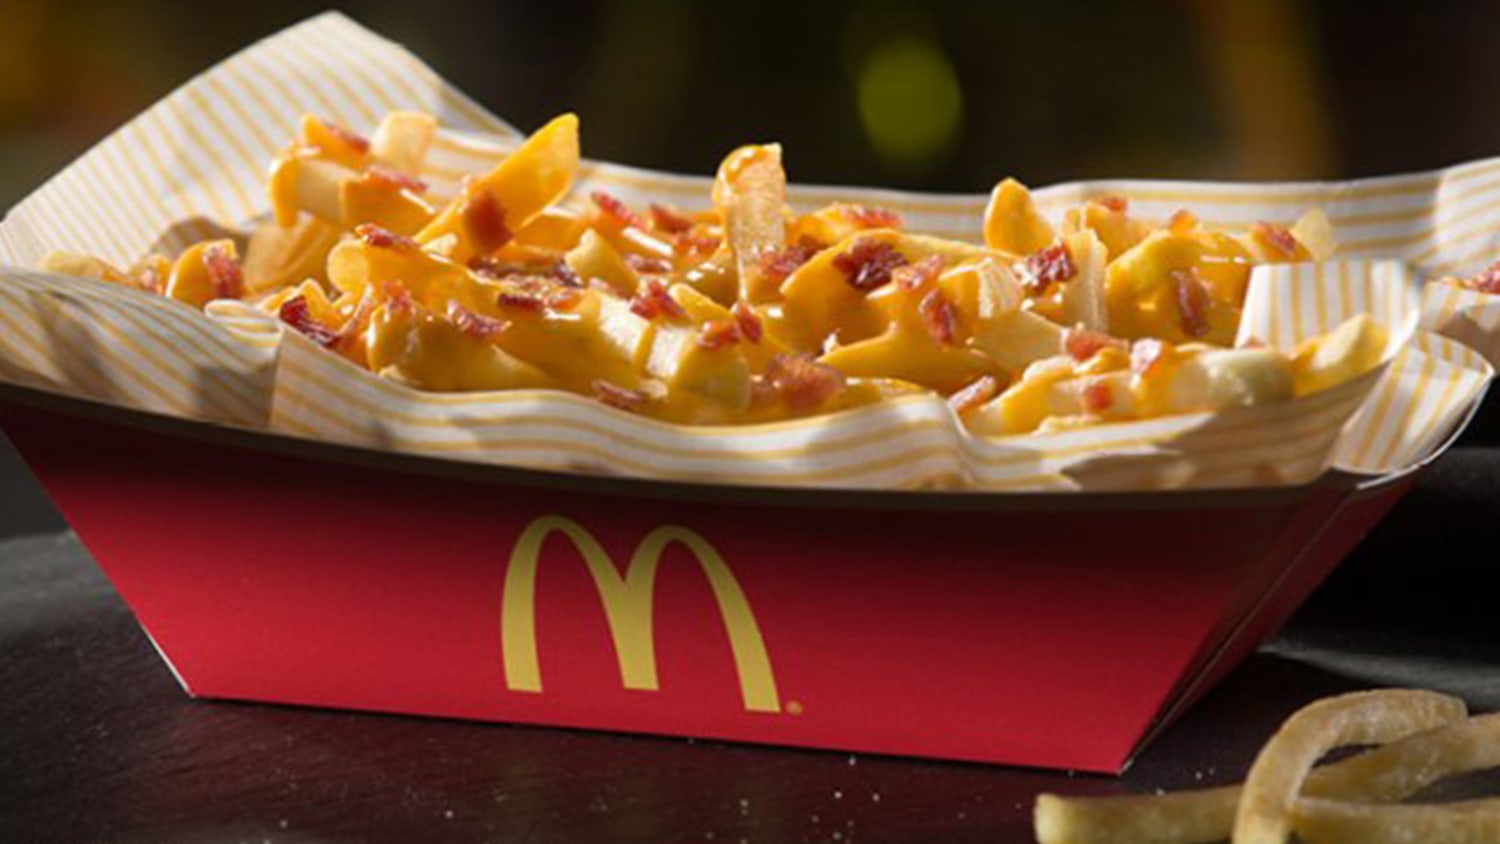 super-limited cheesy bacon fries are returning nationwide